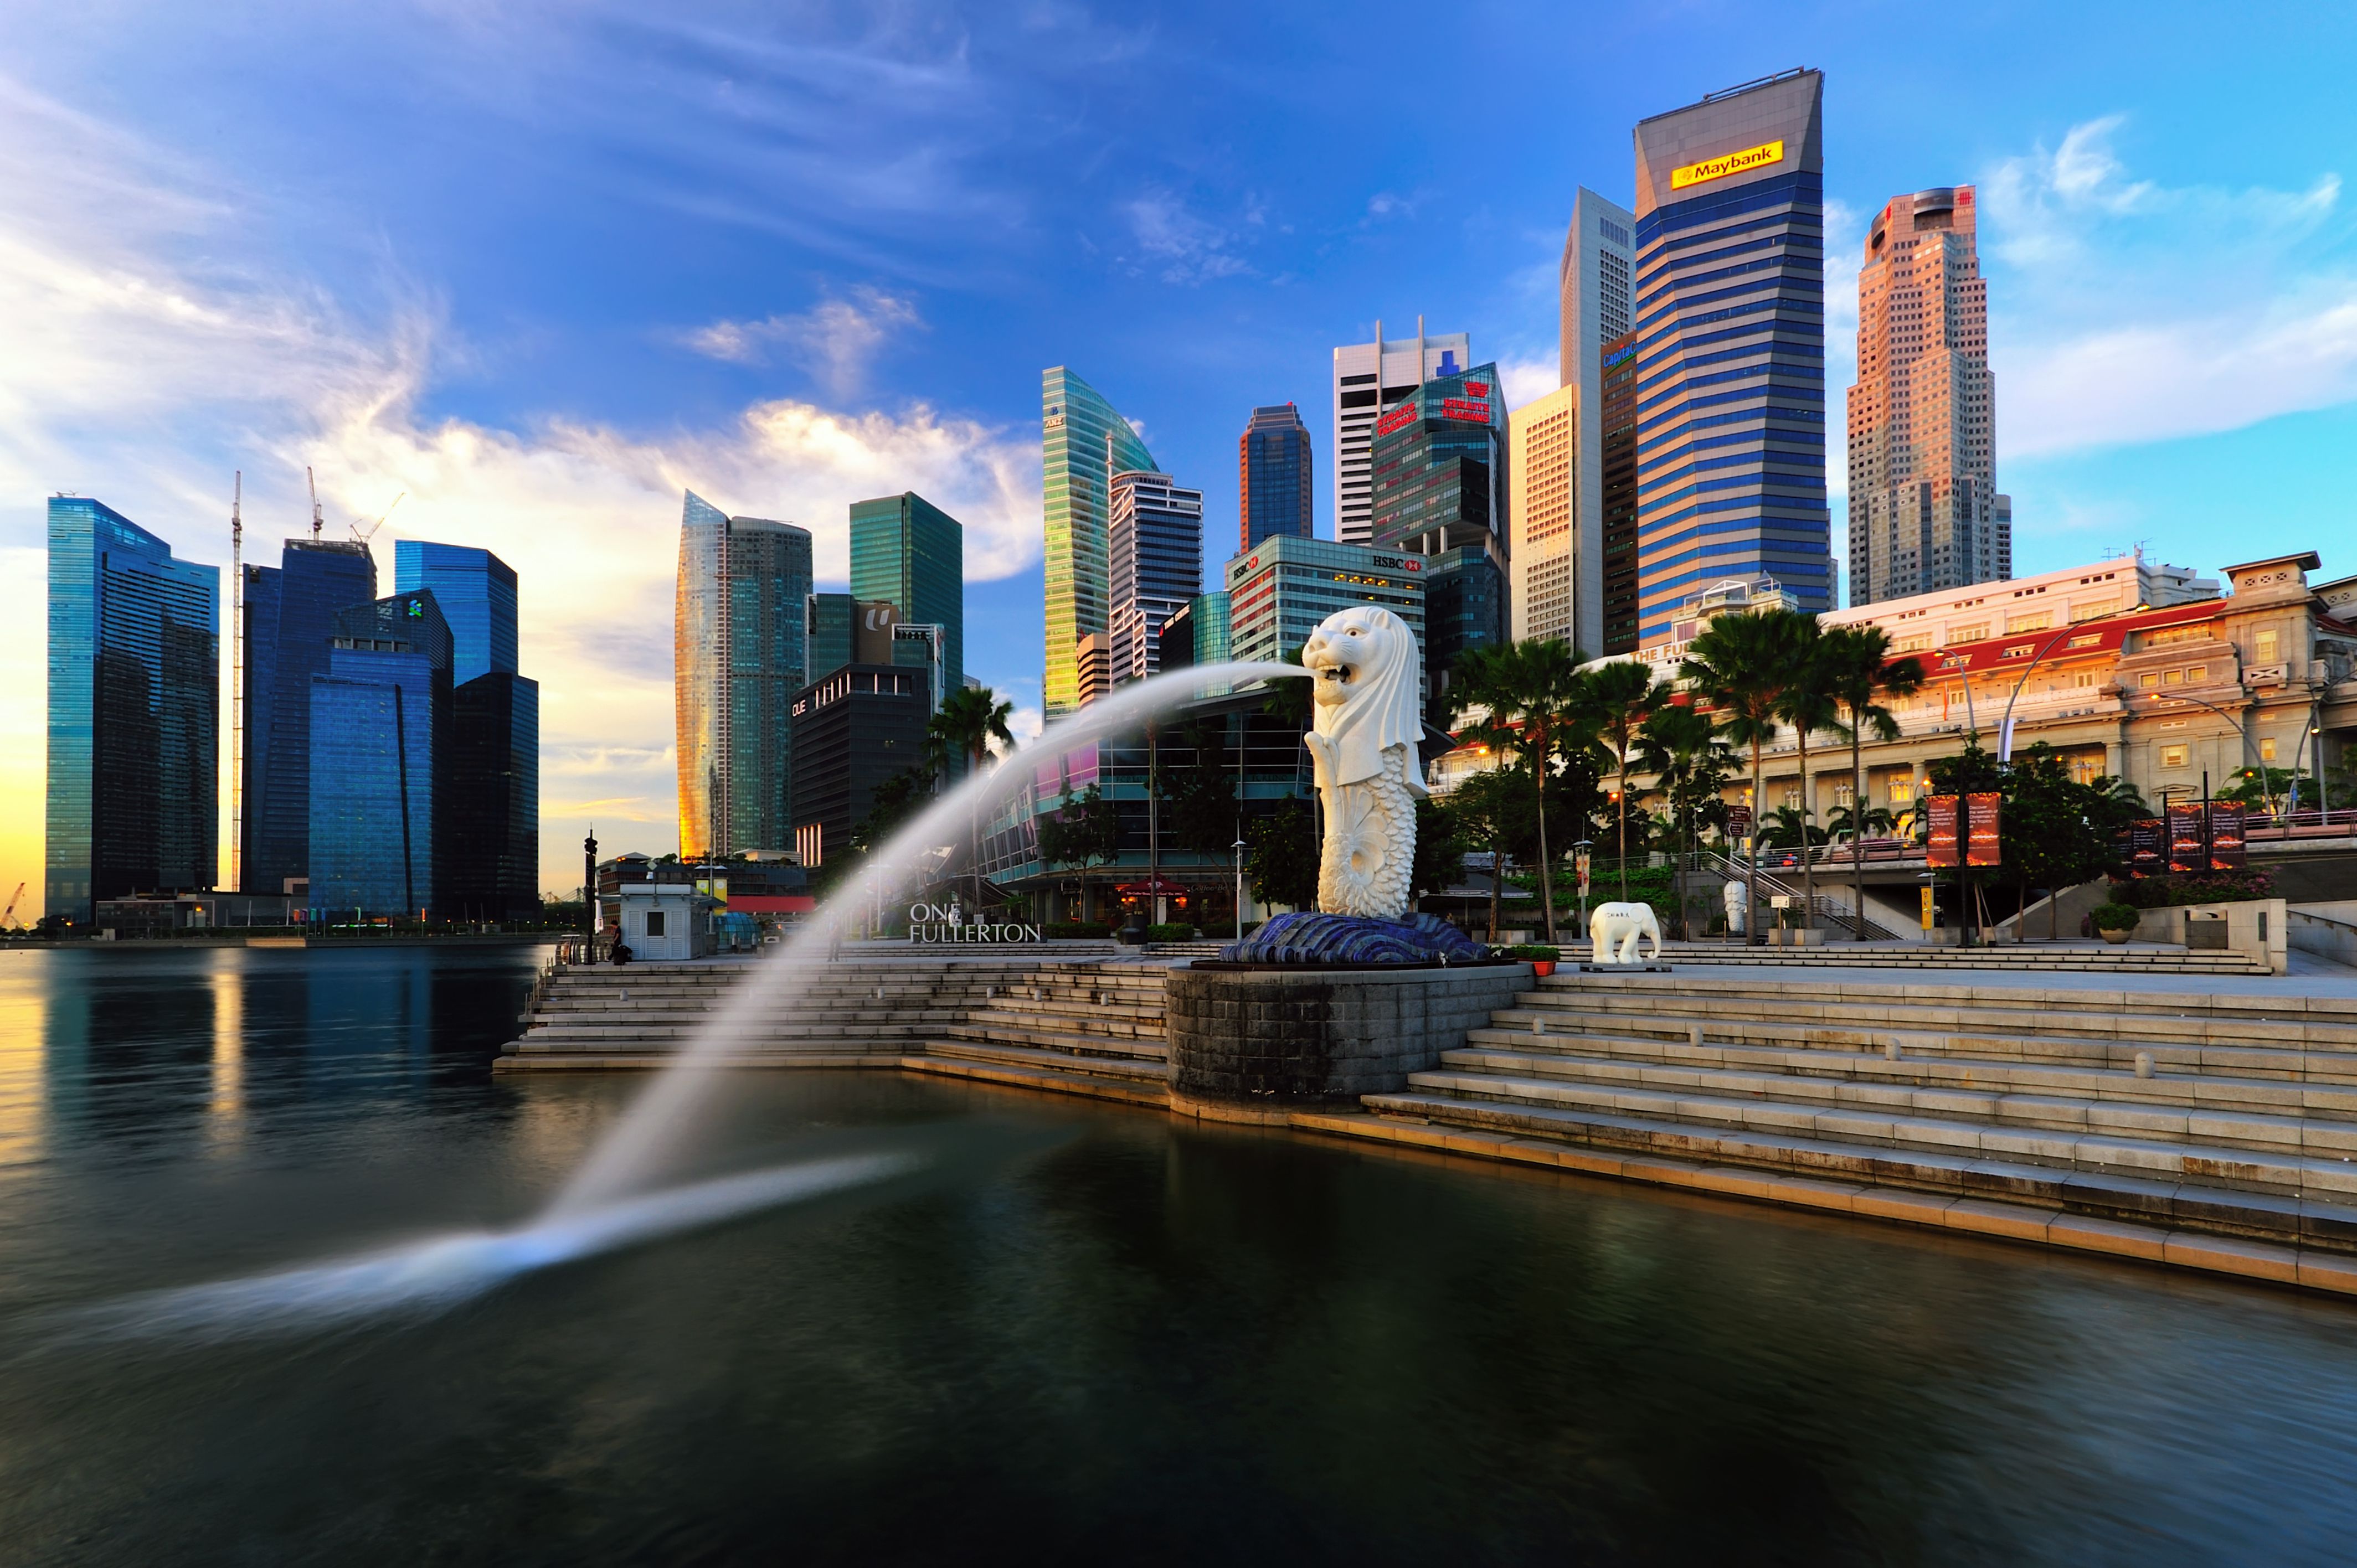 Where Is Singapore: Is It a City, Island, or Country?